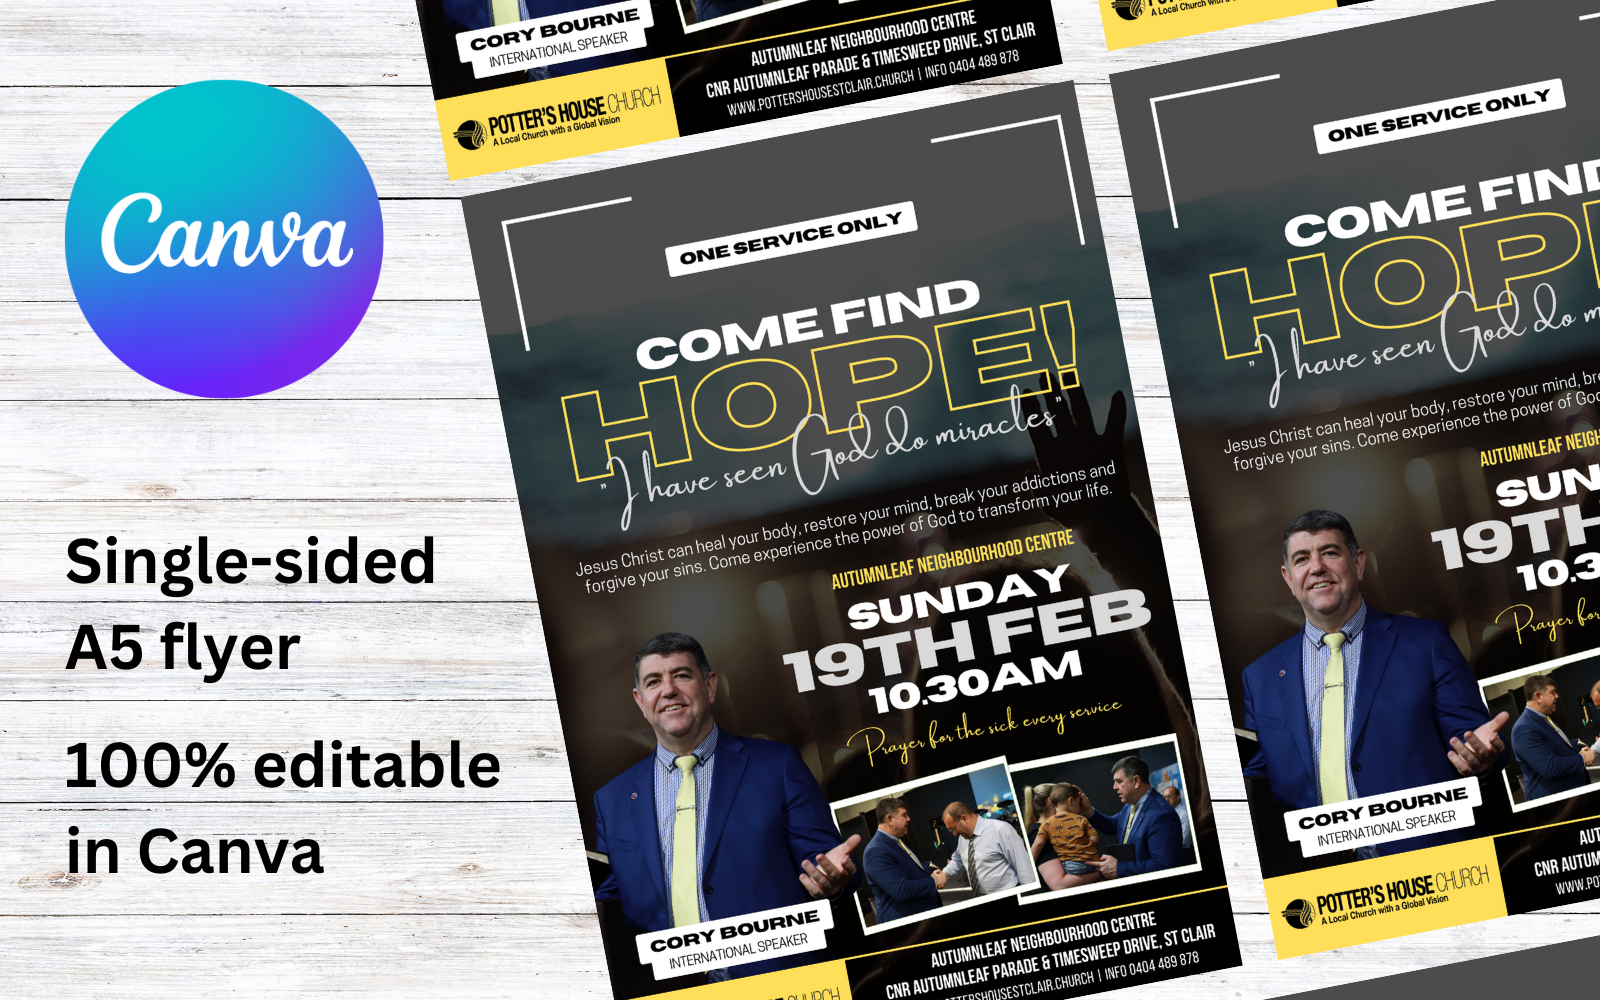 Download Come Find Hope A5 Flyer (one event)